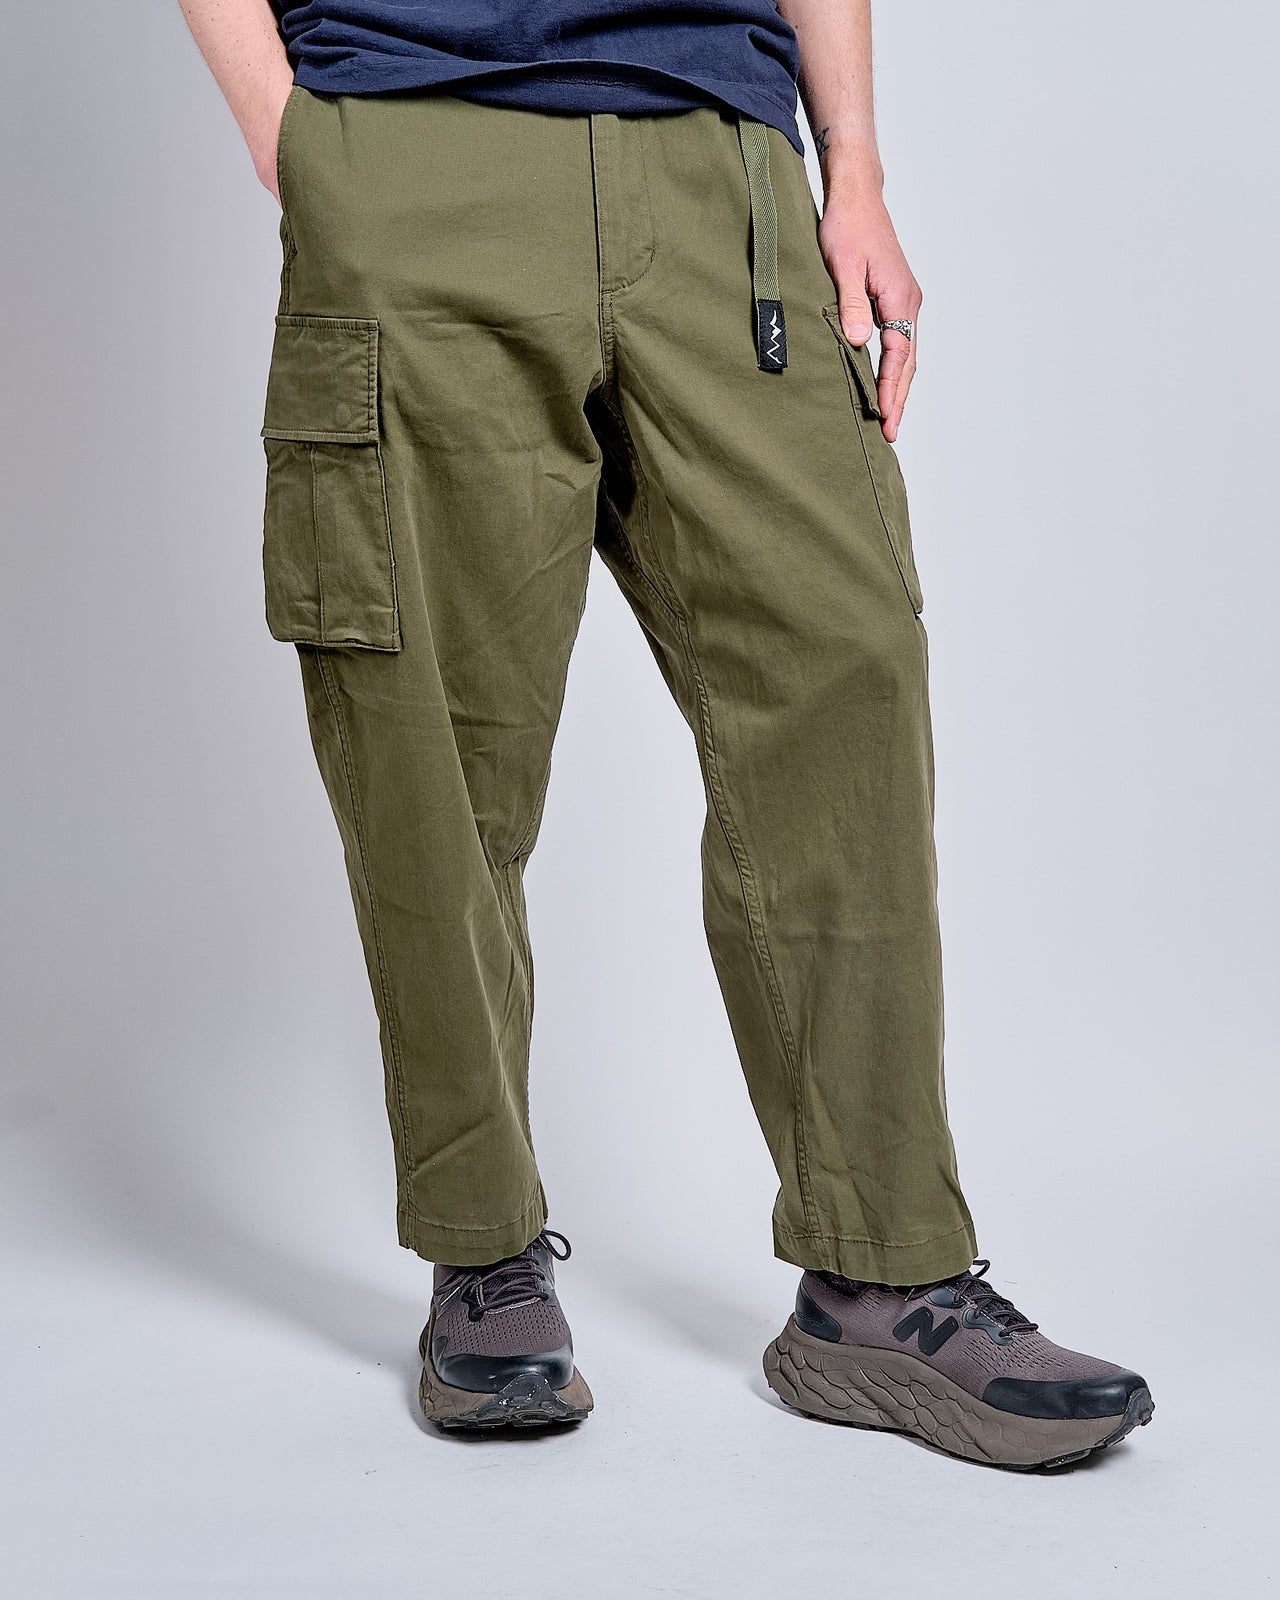 Flex Climber Cargo Pant in Olive